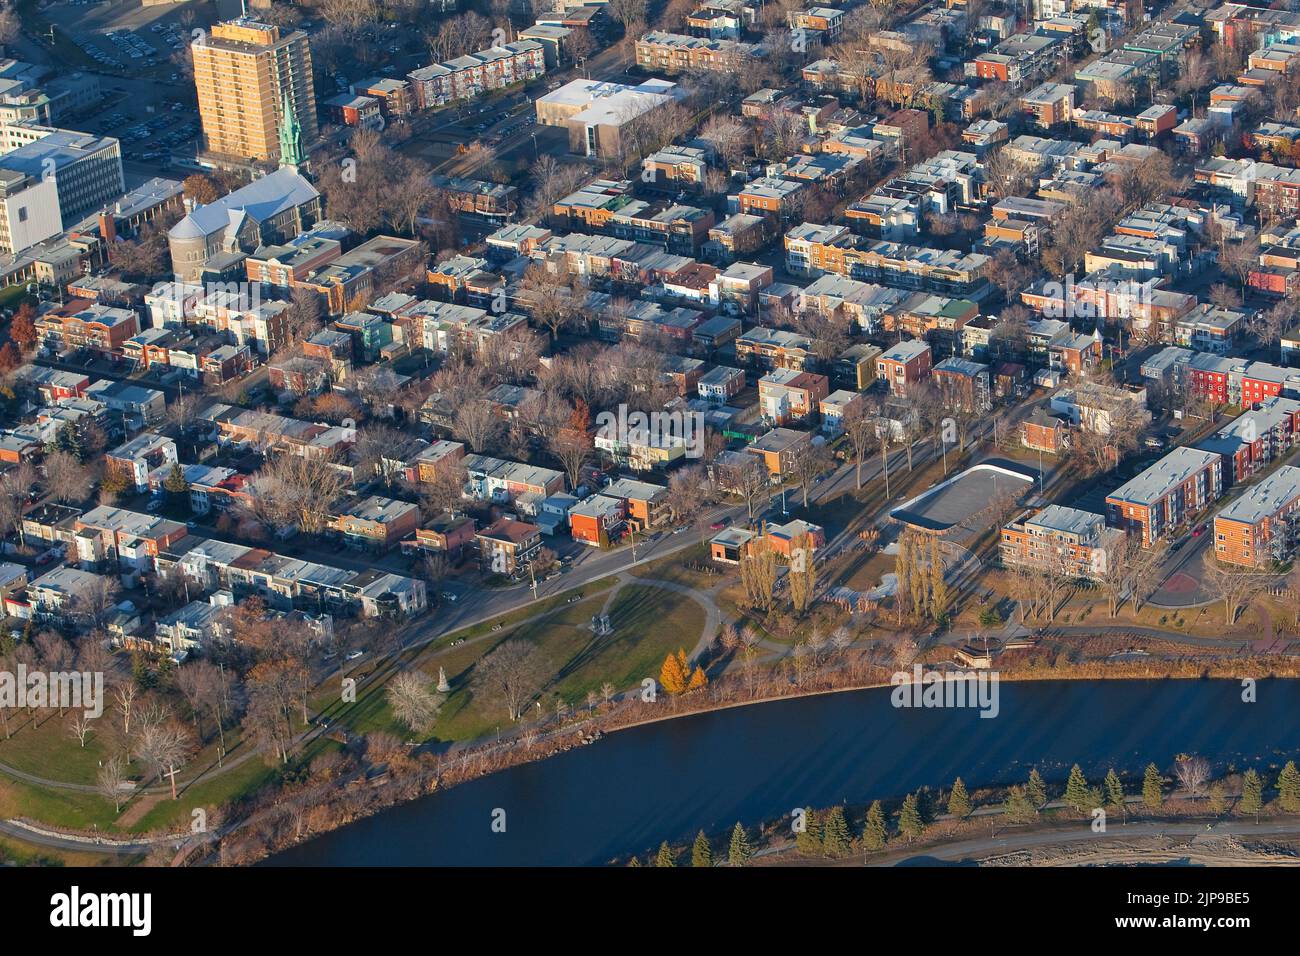 Quartier Limoilou district in Quebec city is pictured in this aerial photo November 11, 2009. Known as a blue collars neighbourhood, the gridded pattern layout district is the second oldest in terms of architecture and second most densely populated borough. Stock Photo